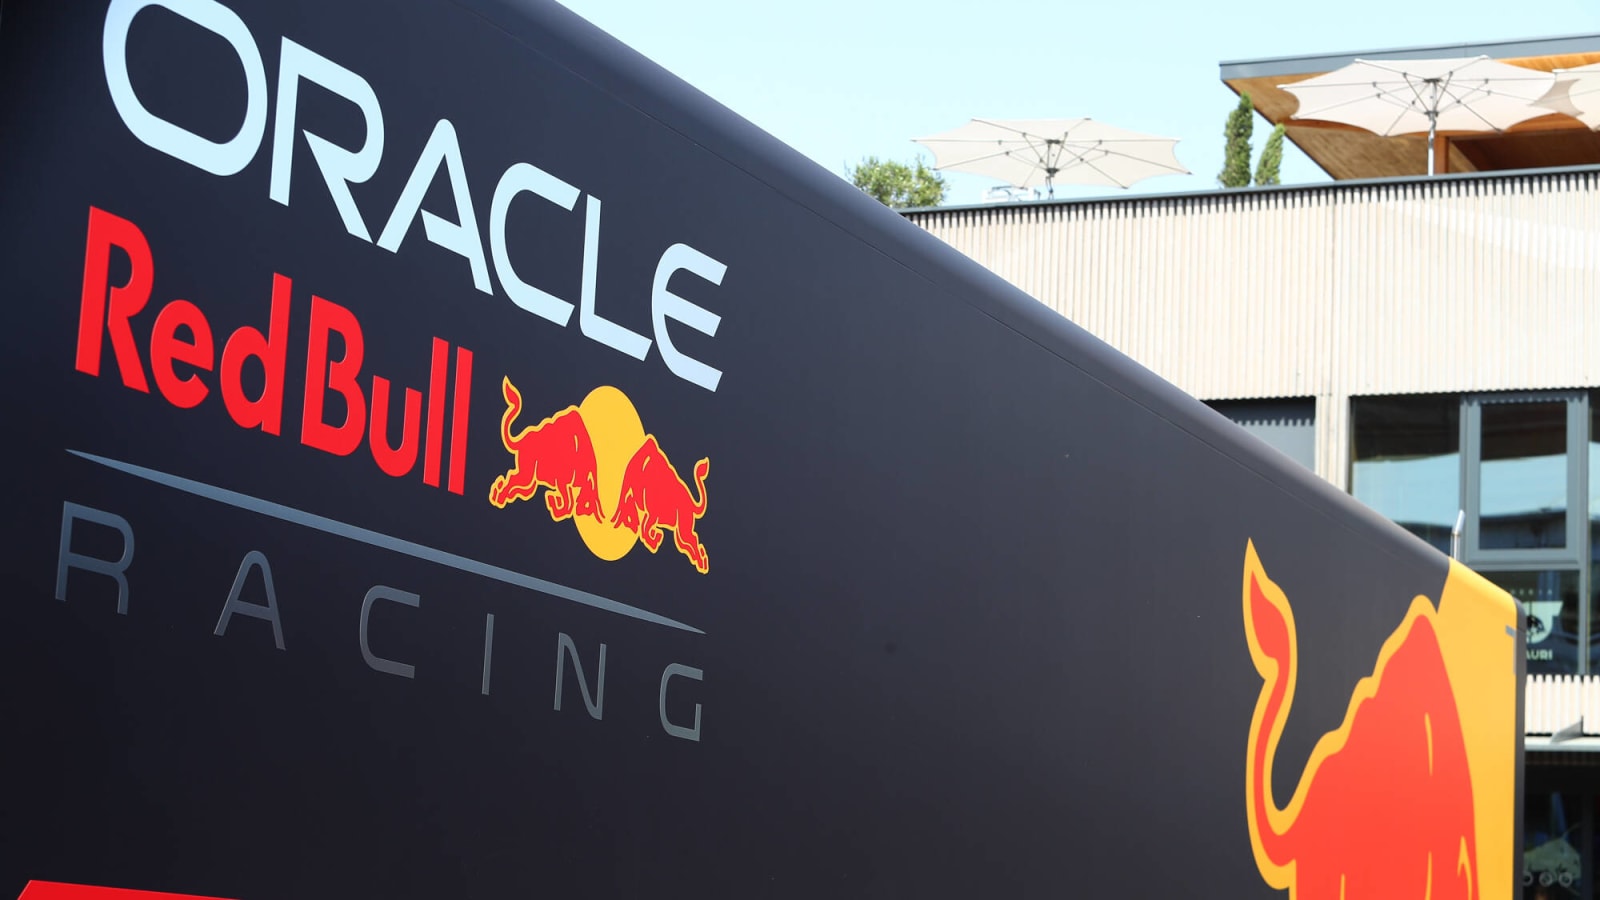 Red Bull partner reveals its extended contribution amidst rumors of being behind schedule